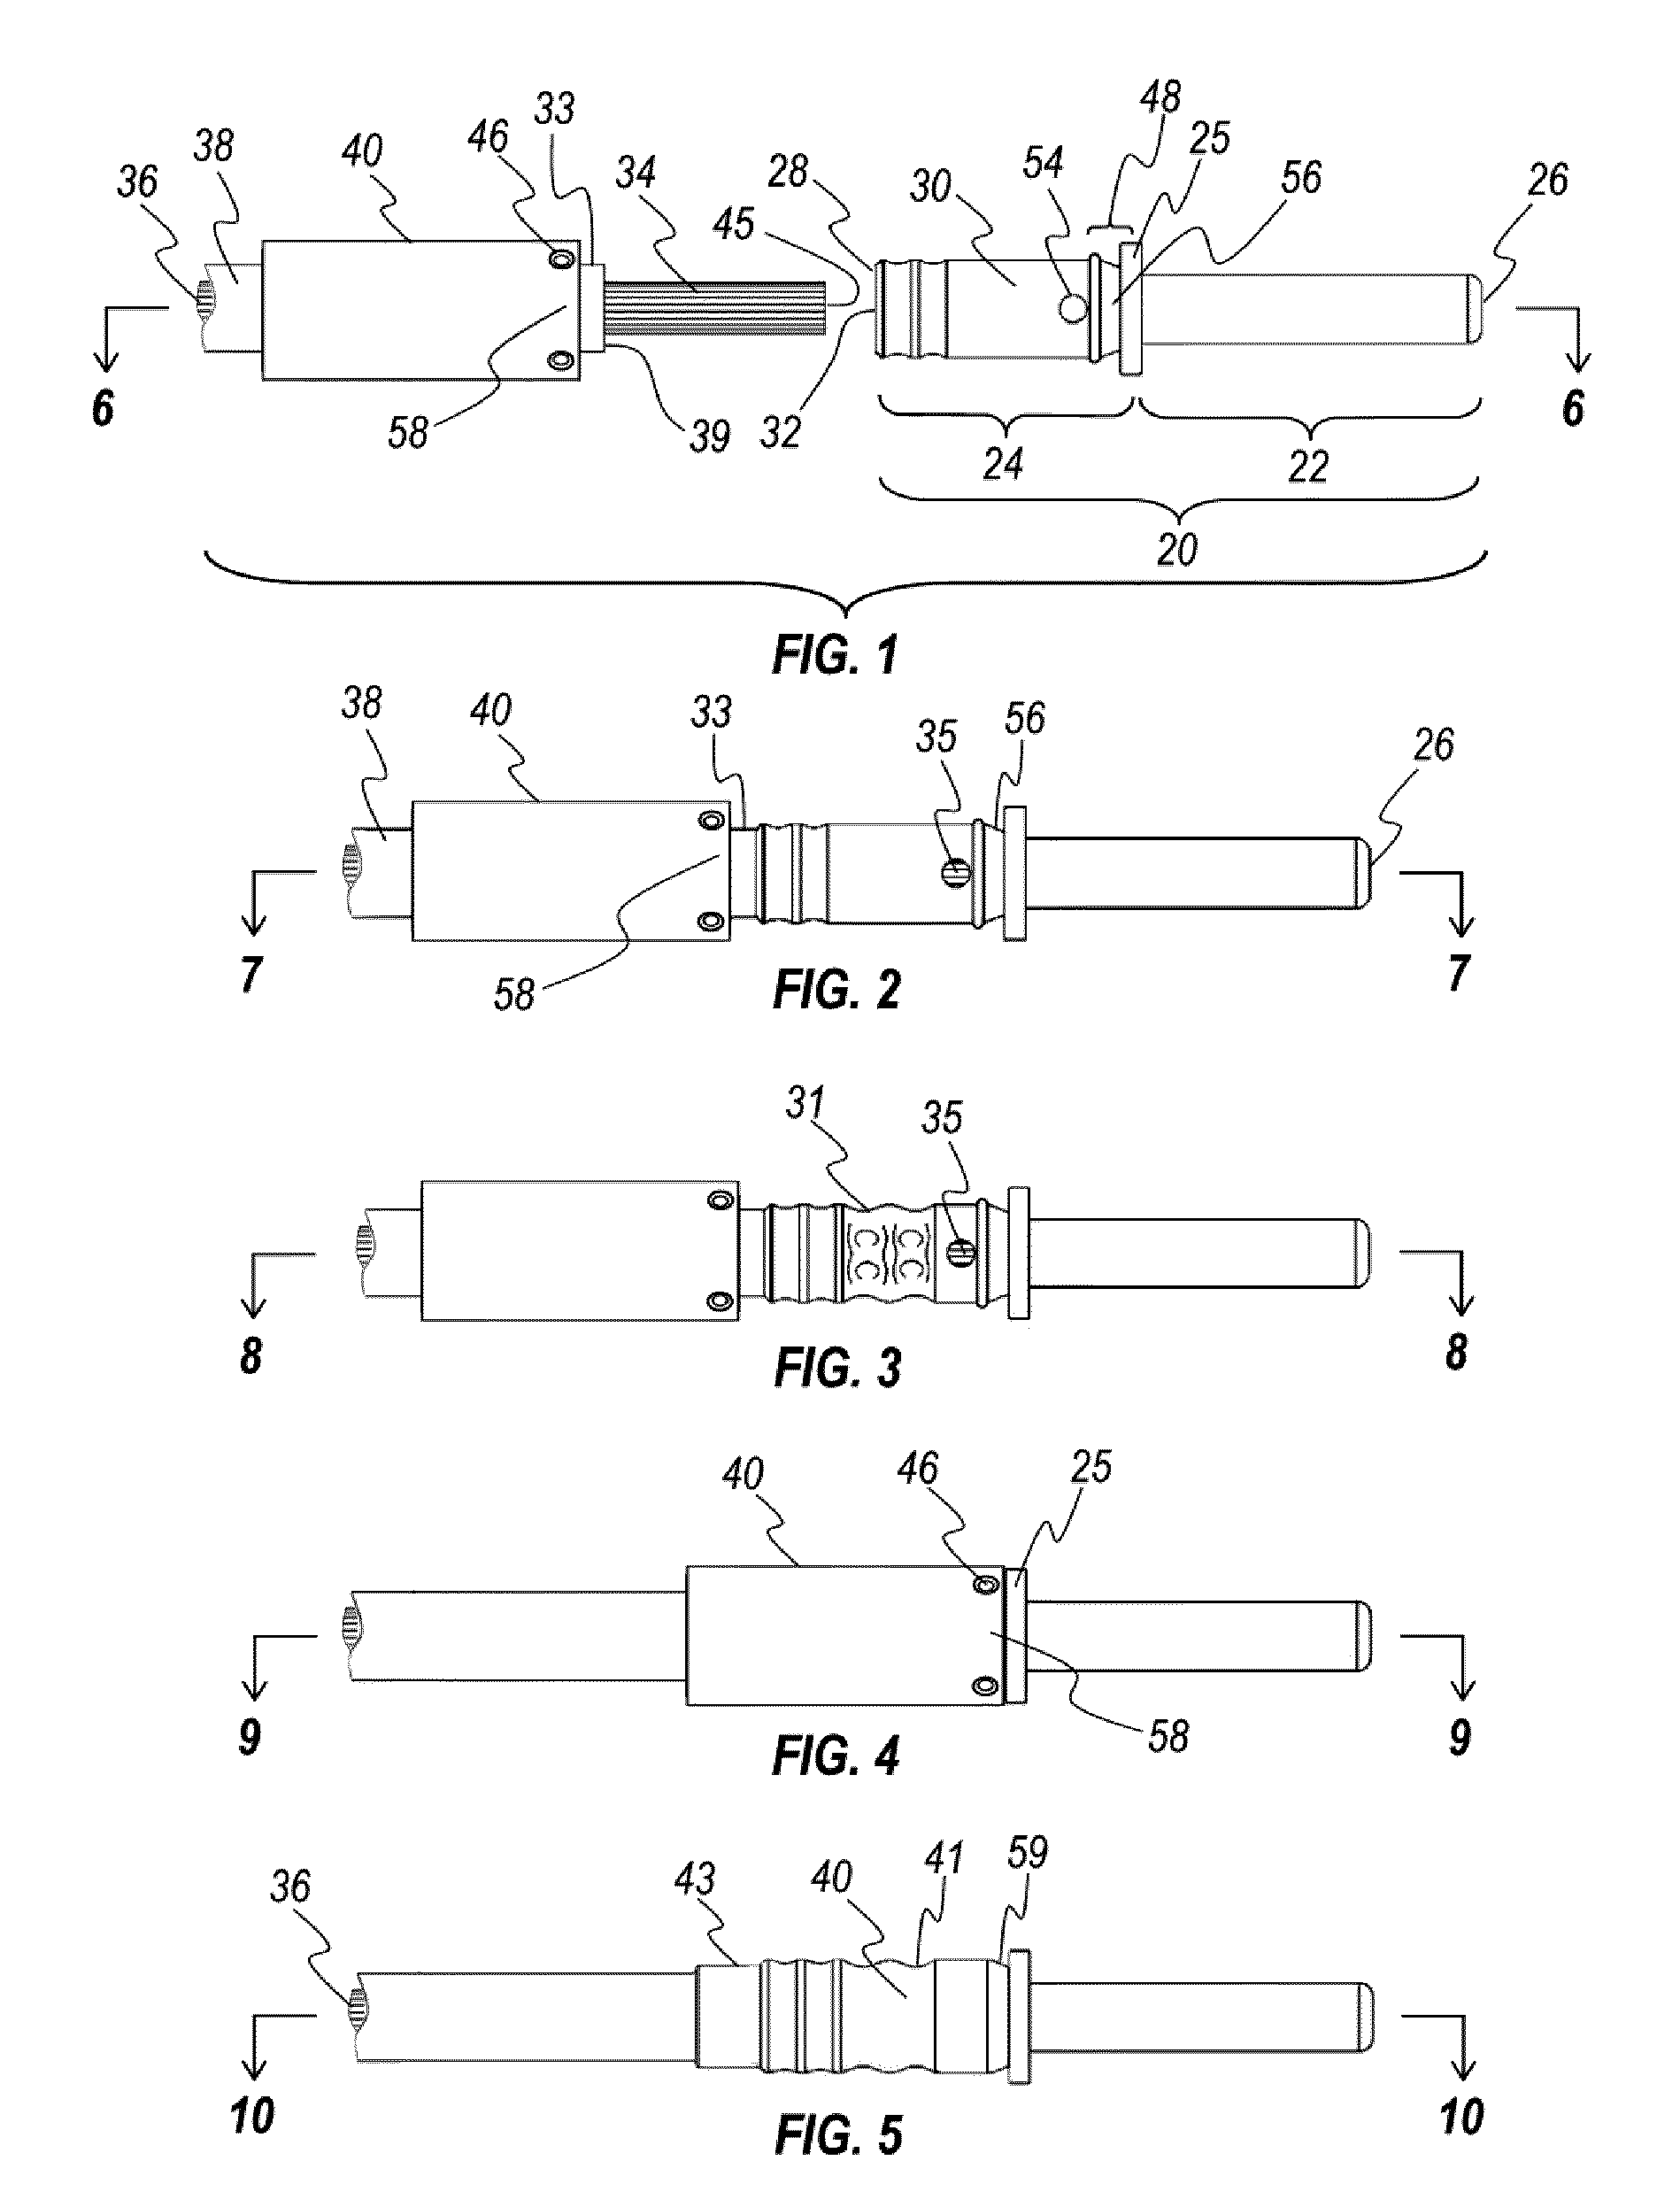 Electrical contact assembly including a sleeve member